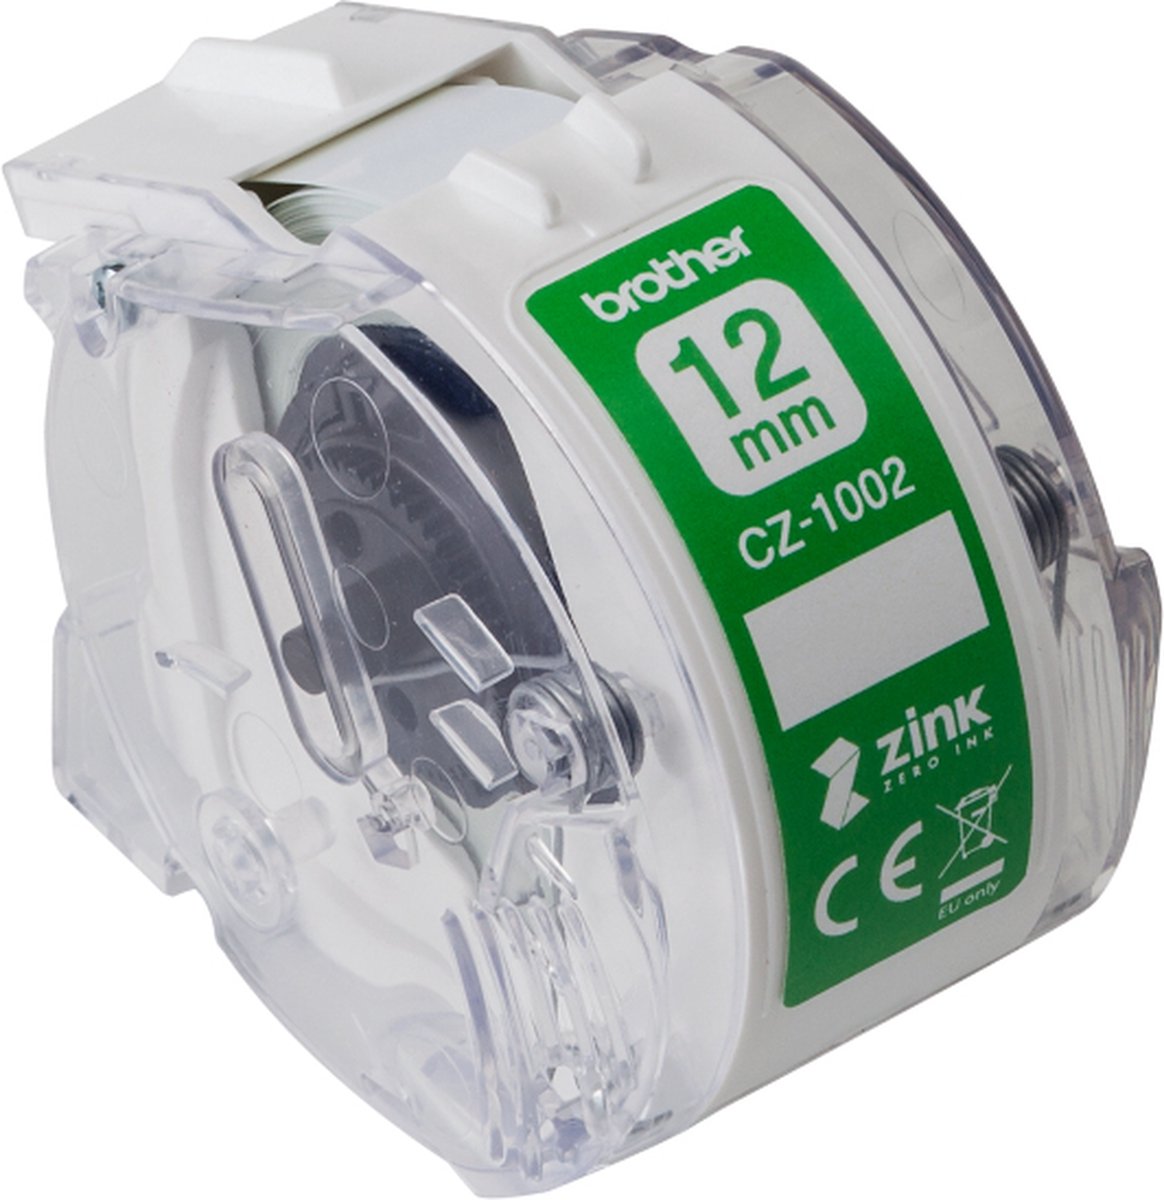 Printer Labels Brother CZ1002 White Green Multicolour - Brother